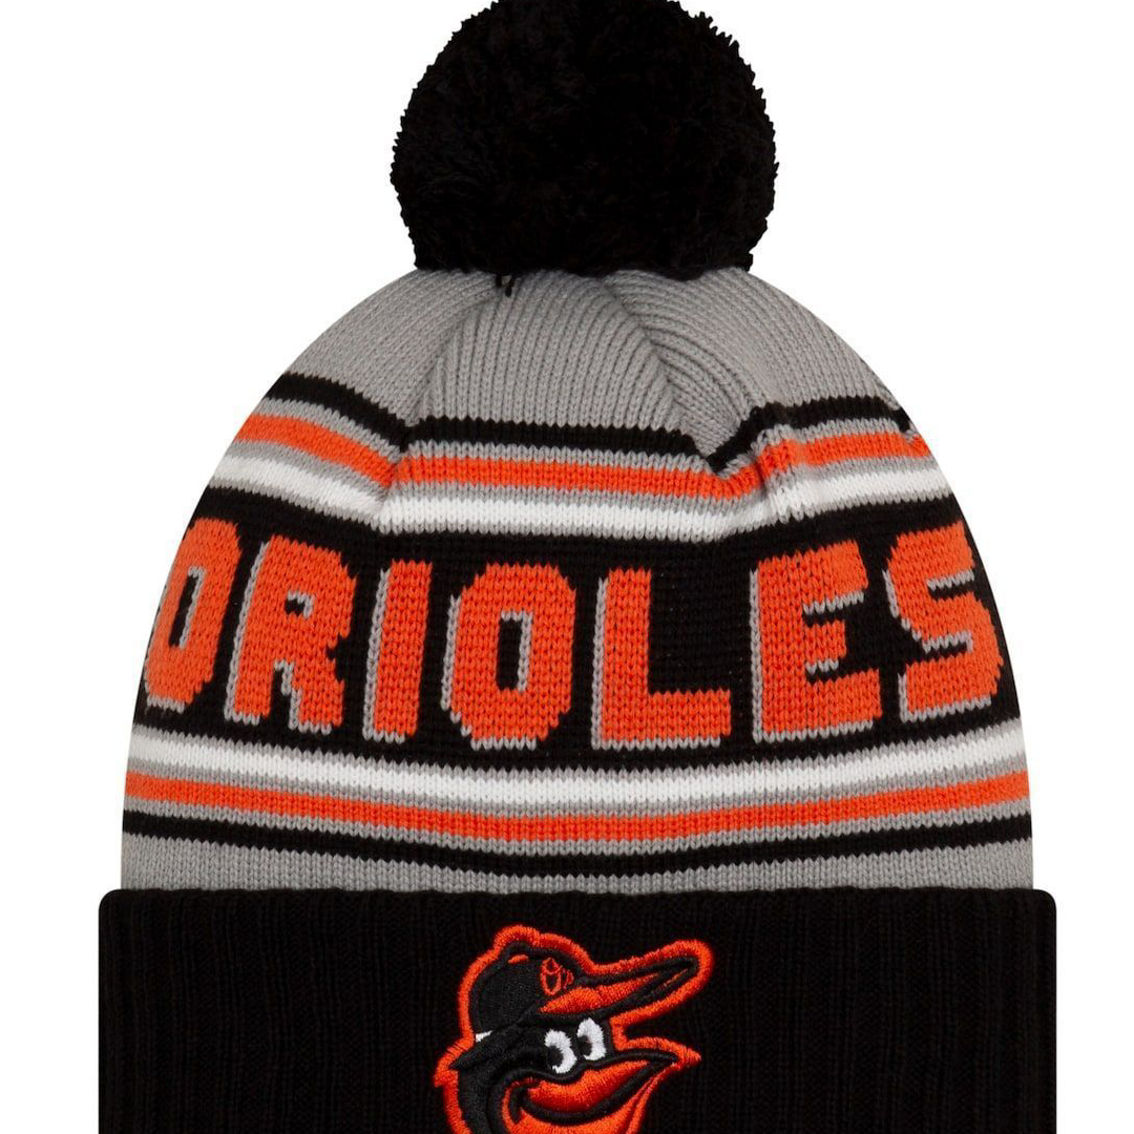 New Era Men's Black Baltimore Orioles Cheer Cuffed Knit Hat with Pom - Image 2 of 3